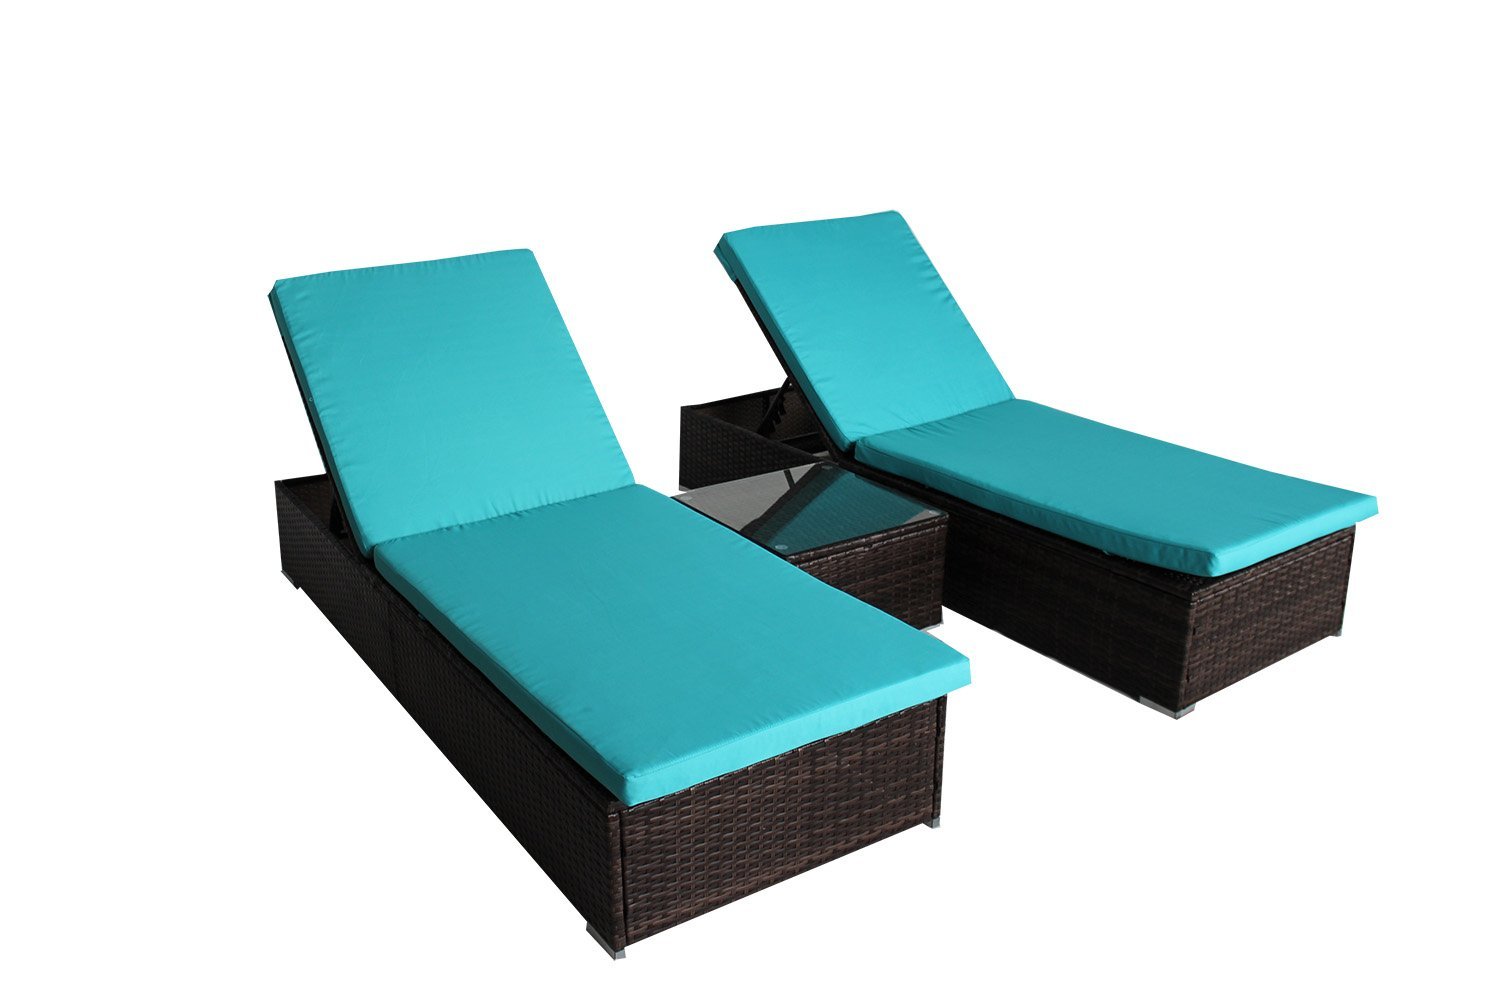 Stylish and Comfortable Patio Furniture on a Budget!